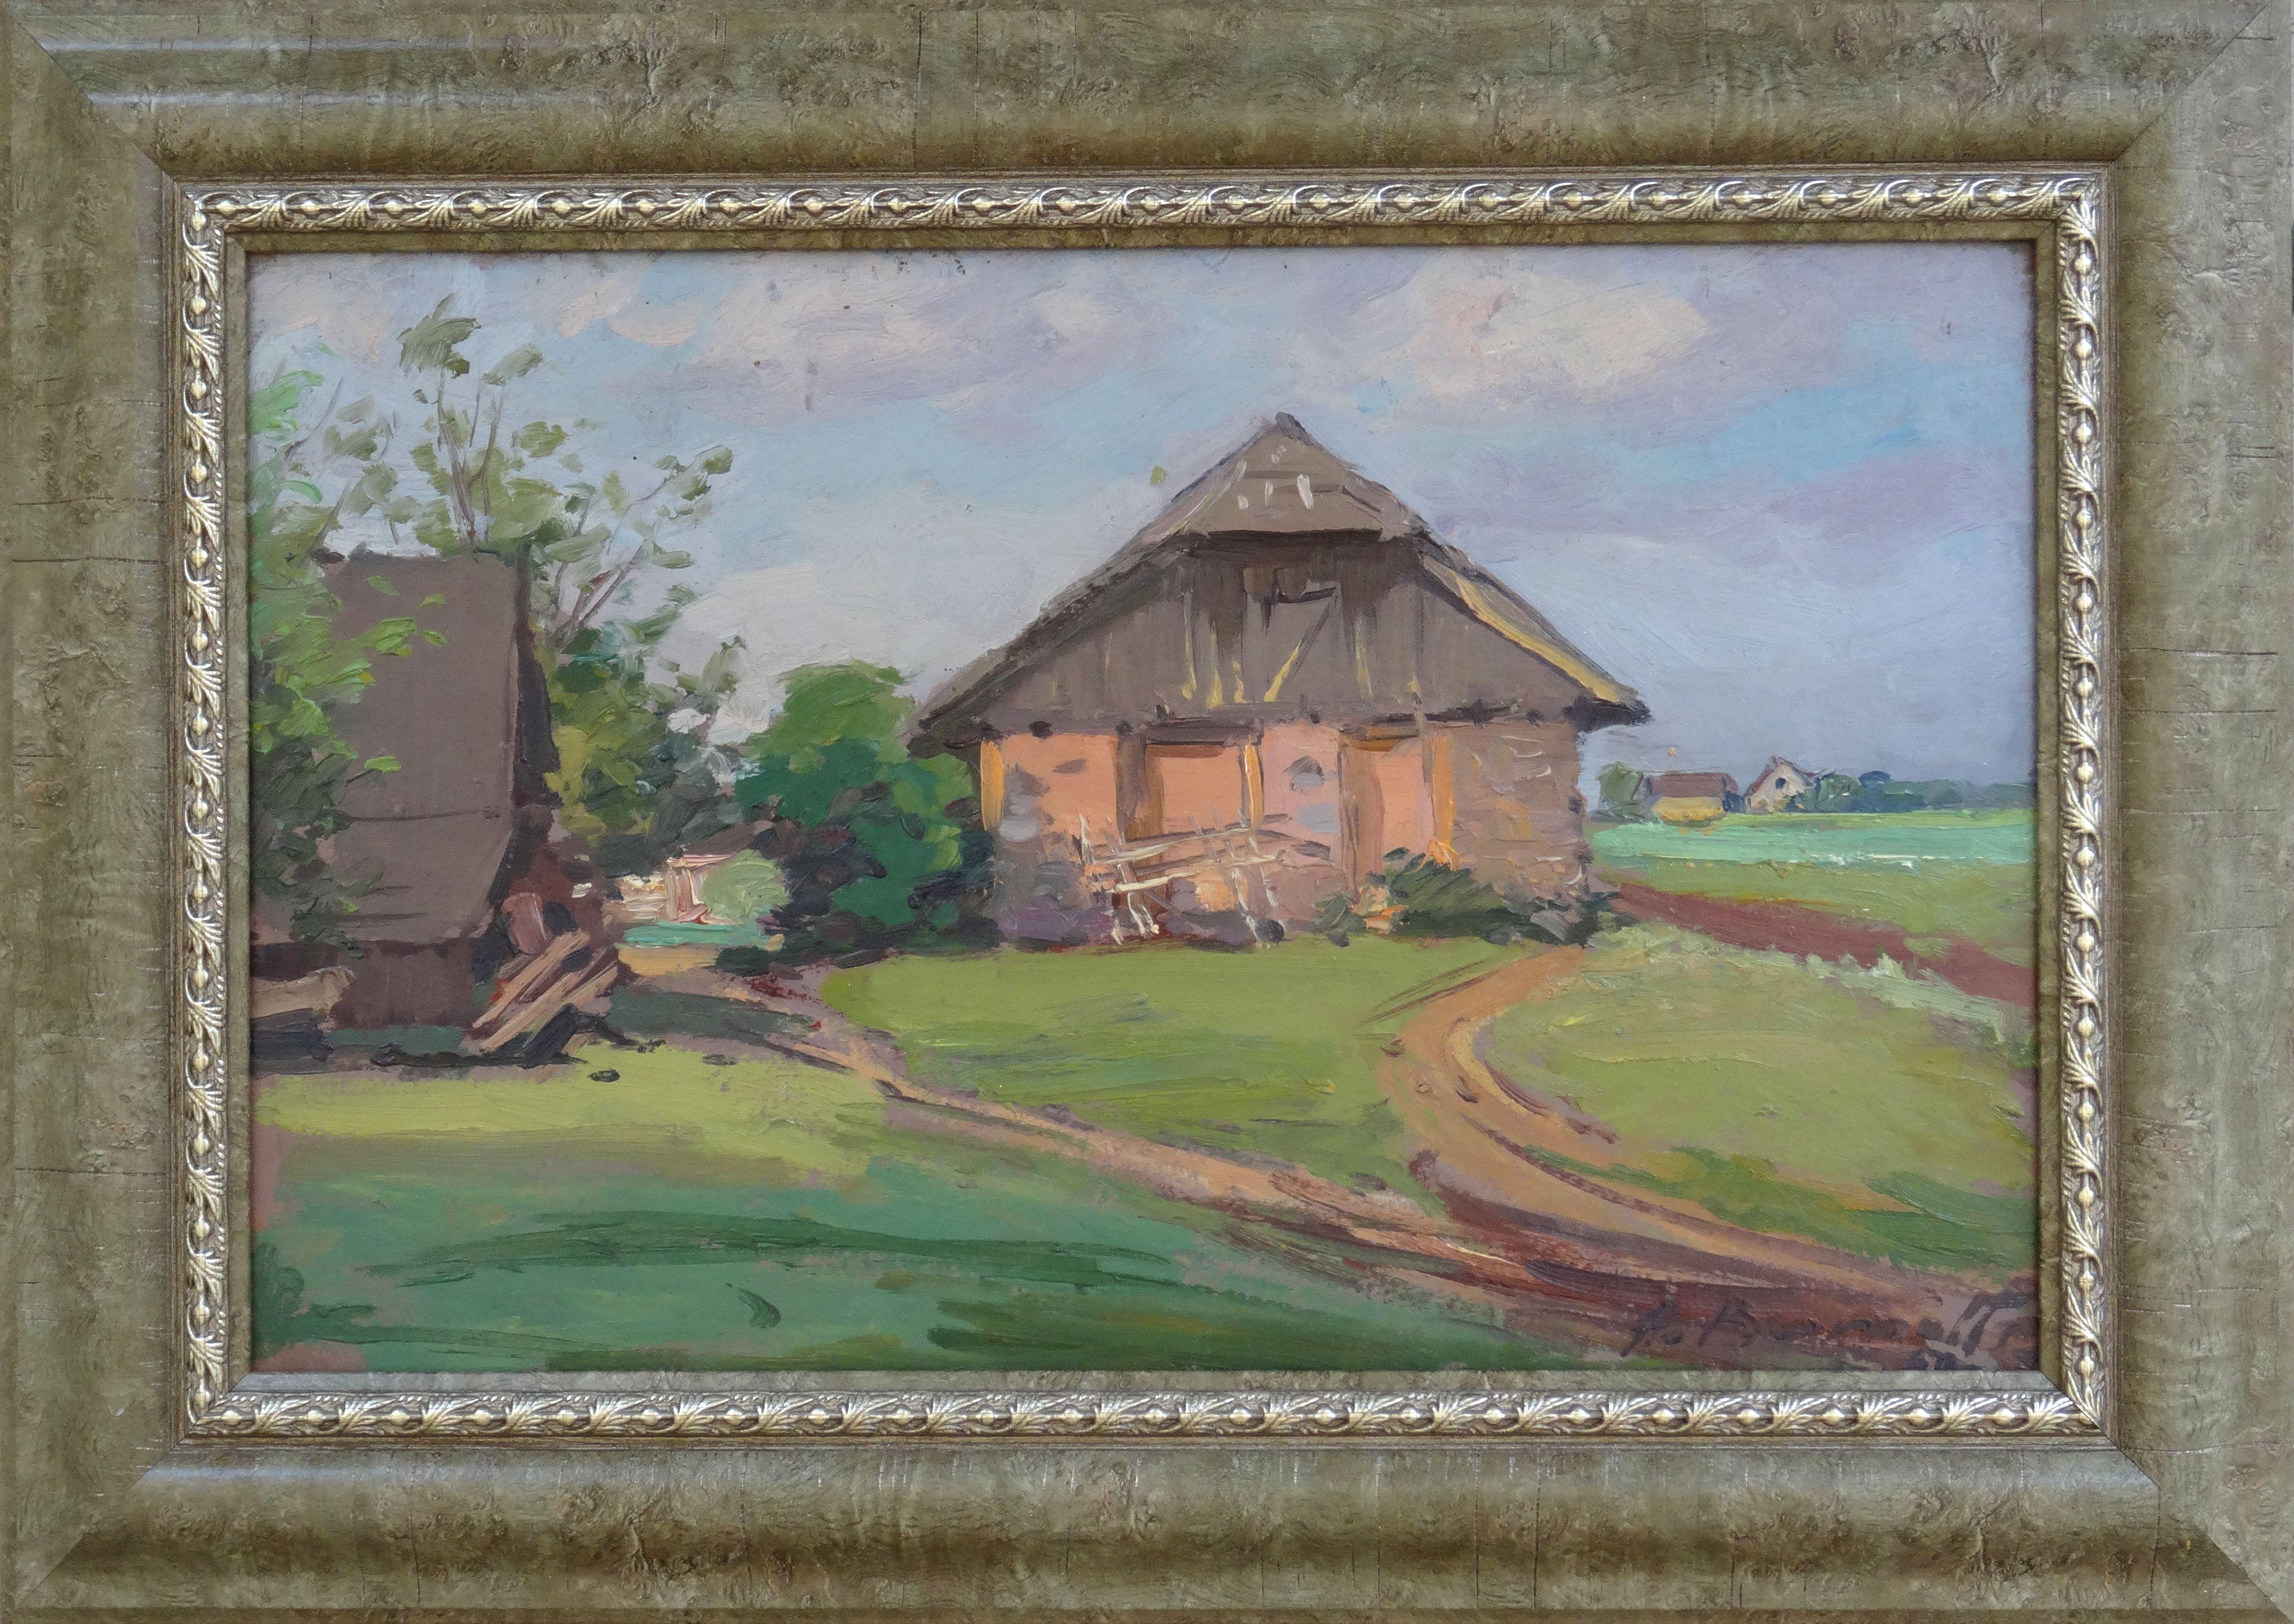 Rural life. 1970s, cardboard, oil, 23.5x36.5 cm - Painting by Alfejs Bromults